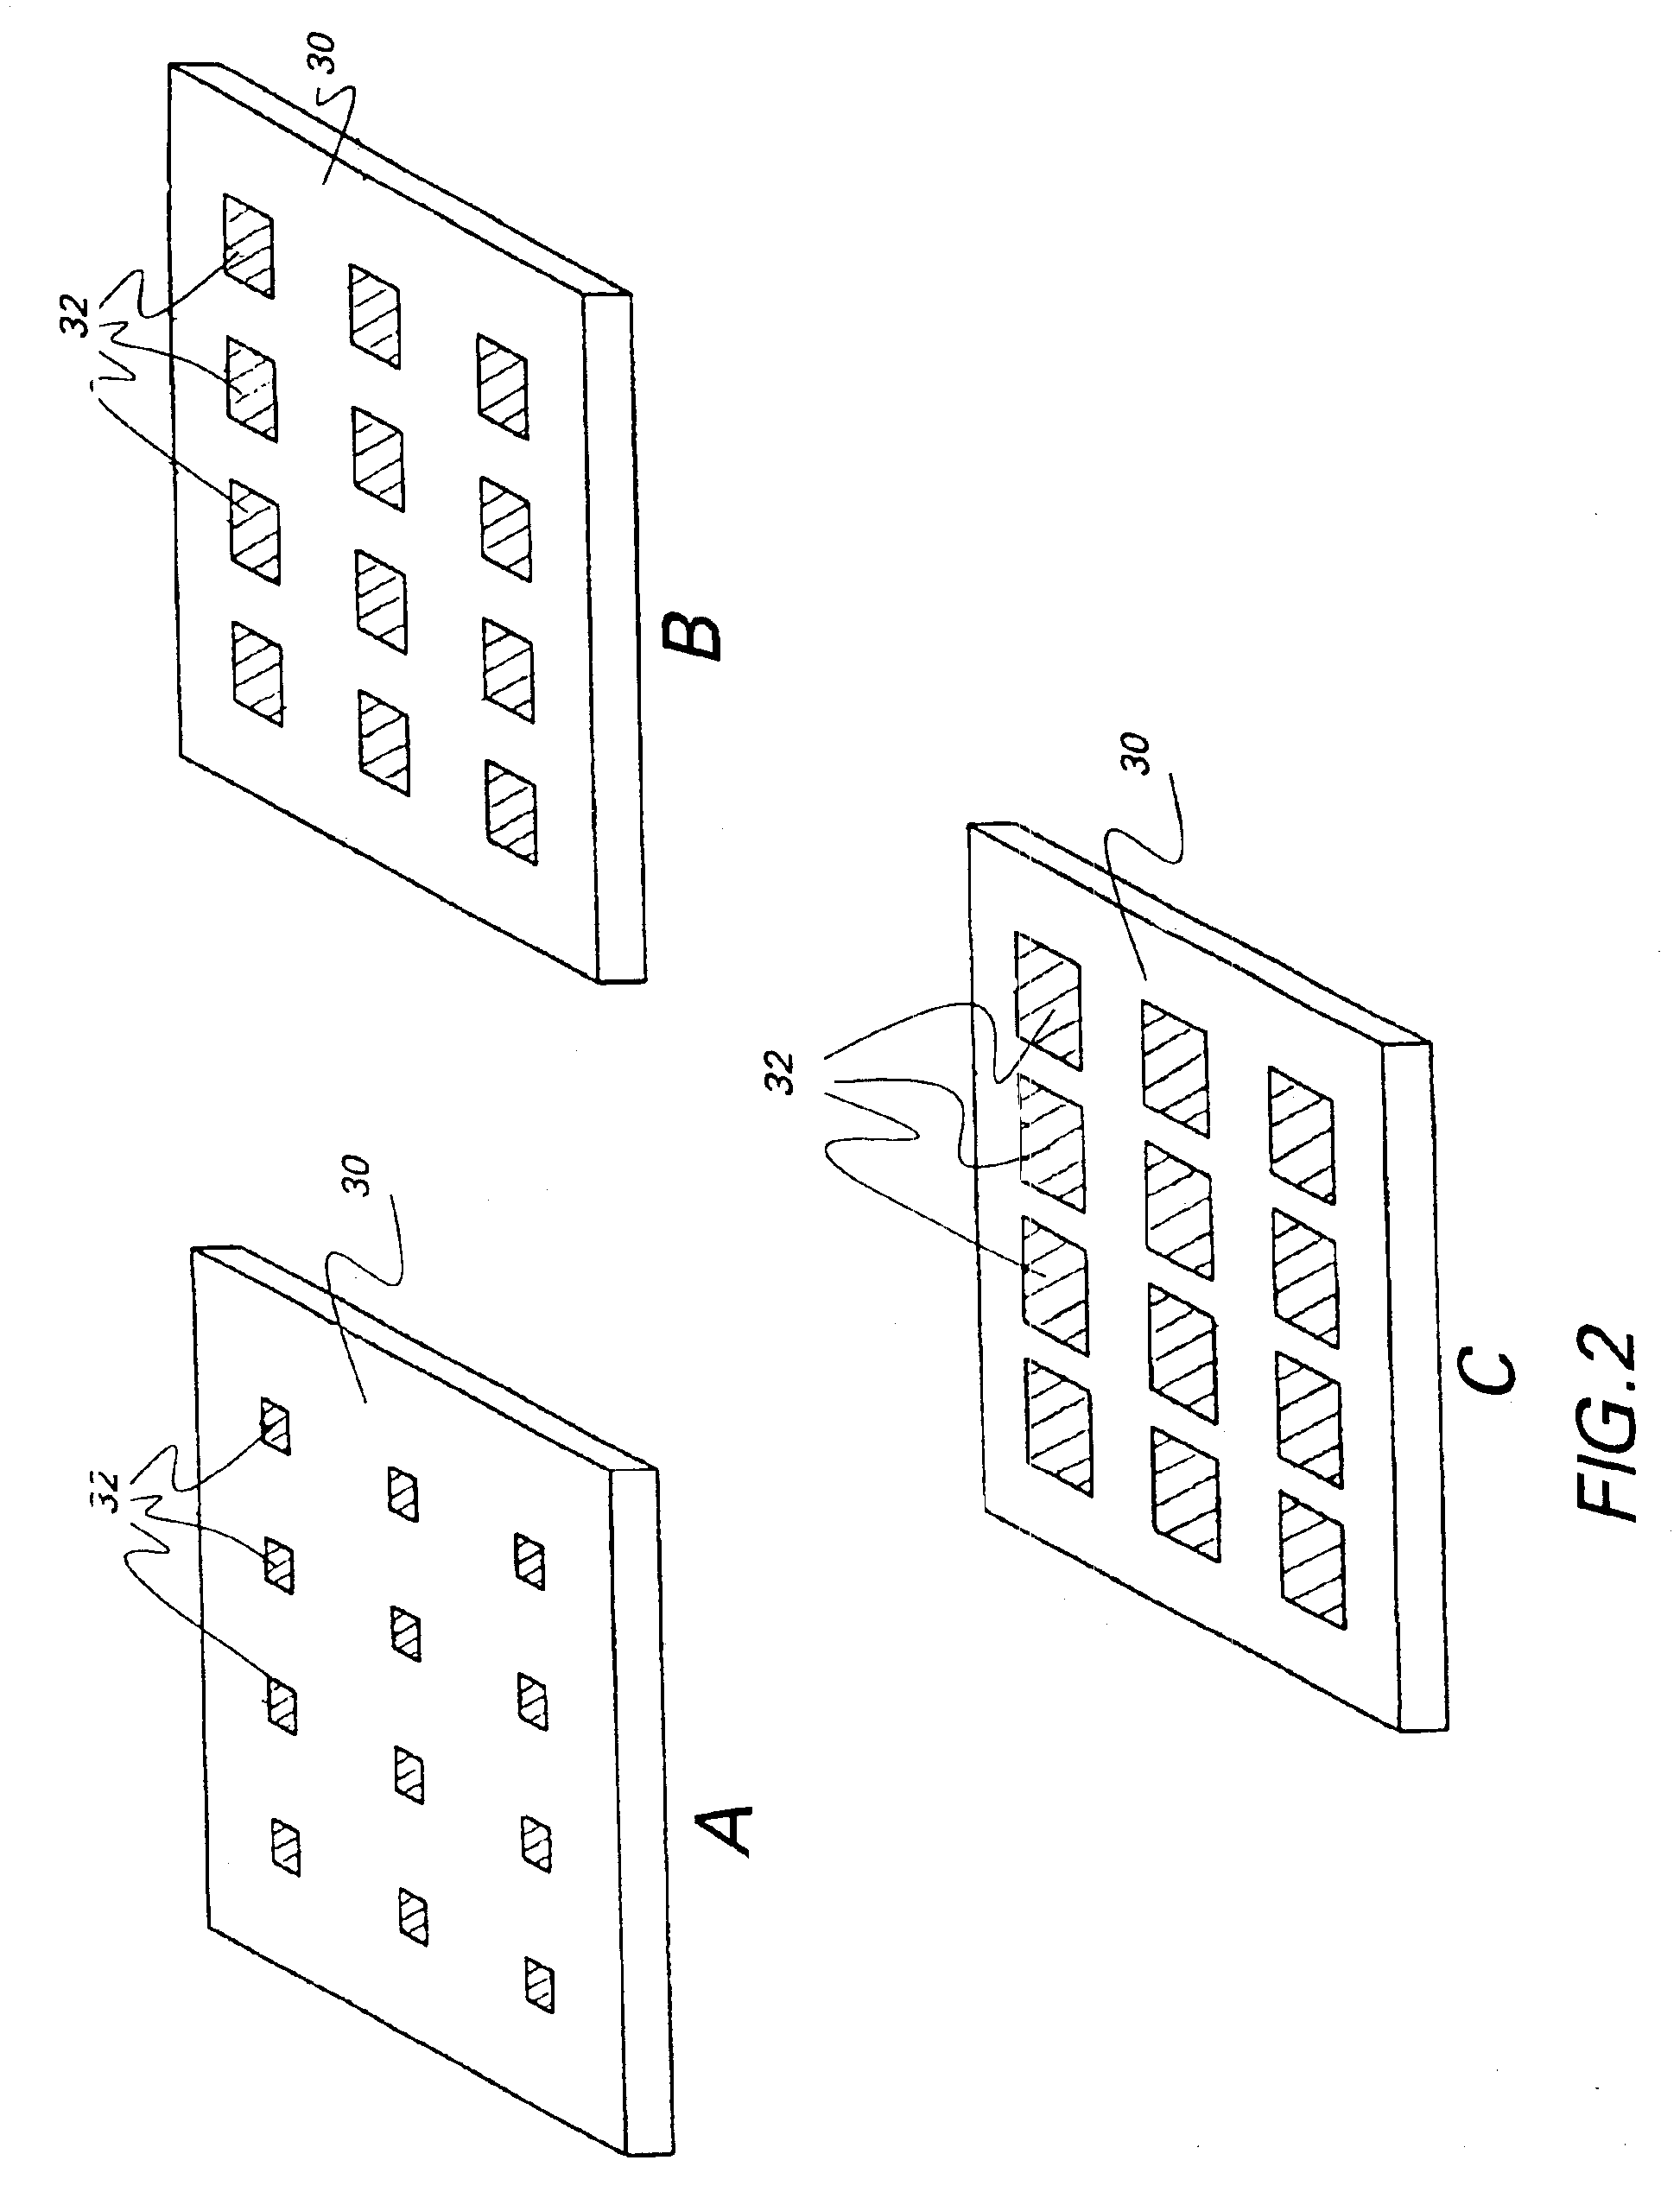 Matching layer having gradient in impedance for ultrasound transducers